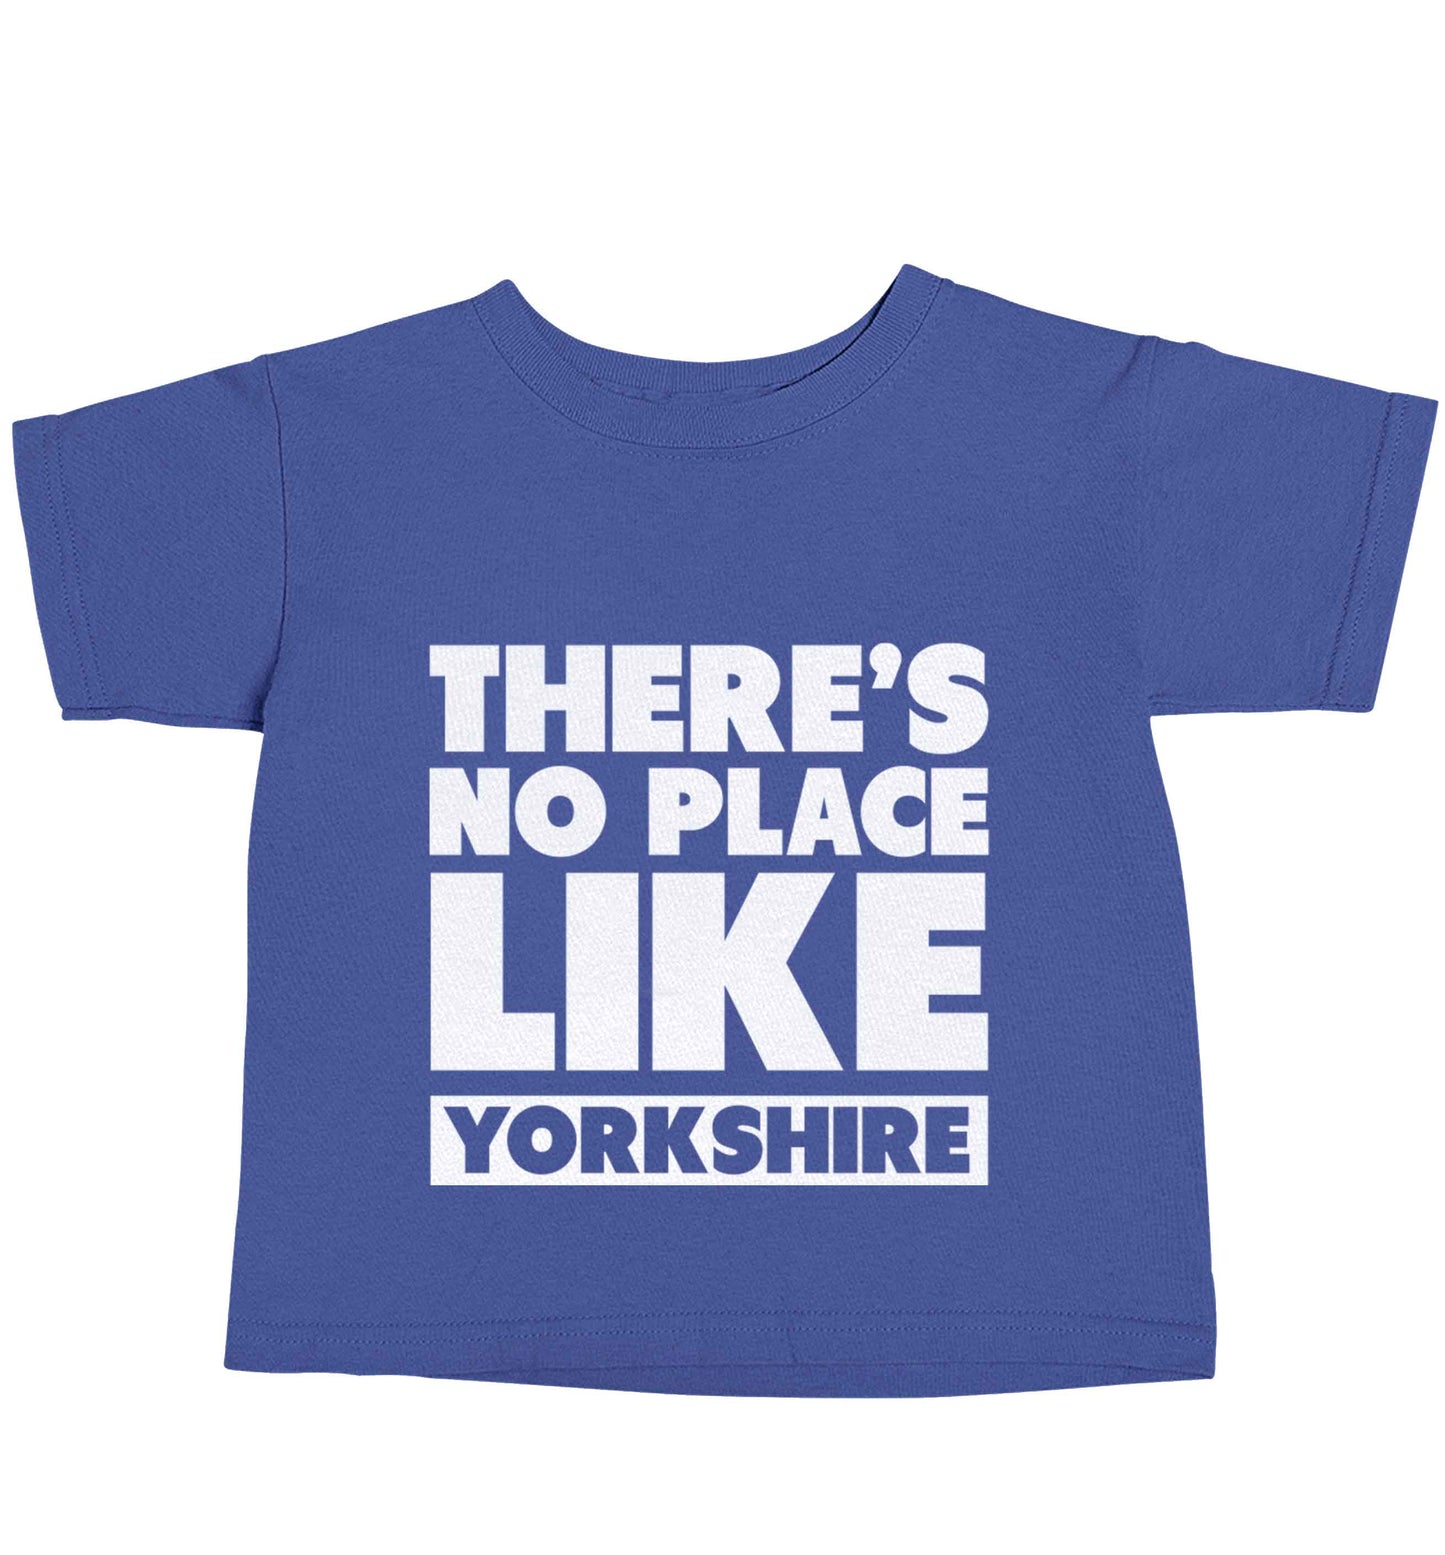 There's no place like Yorkshire blue baby toddler Tshirt 2 Years